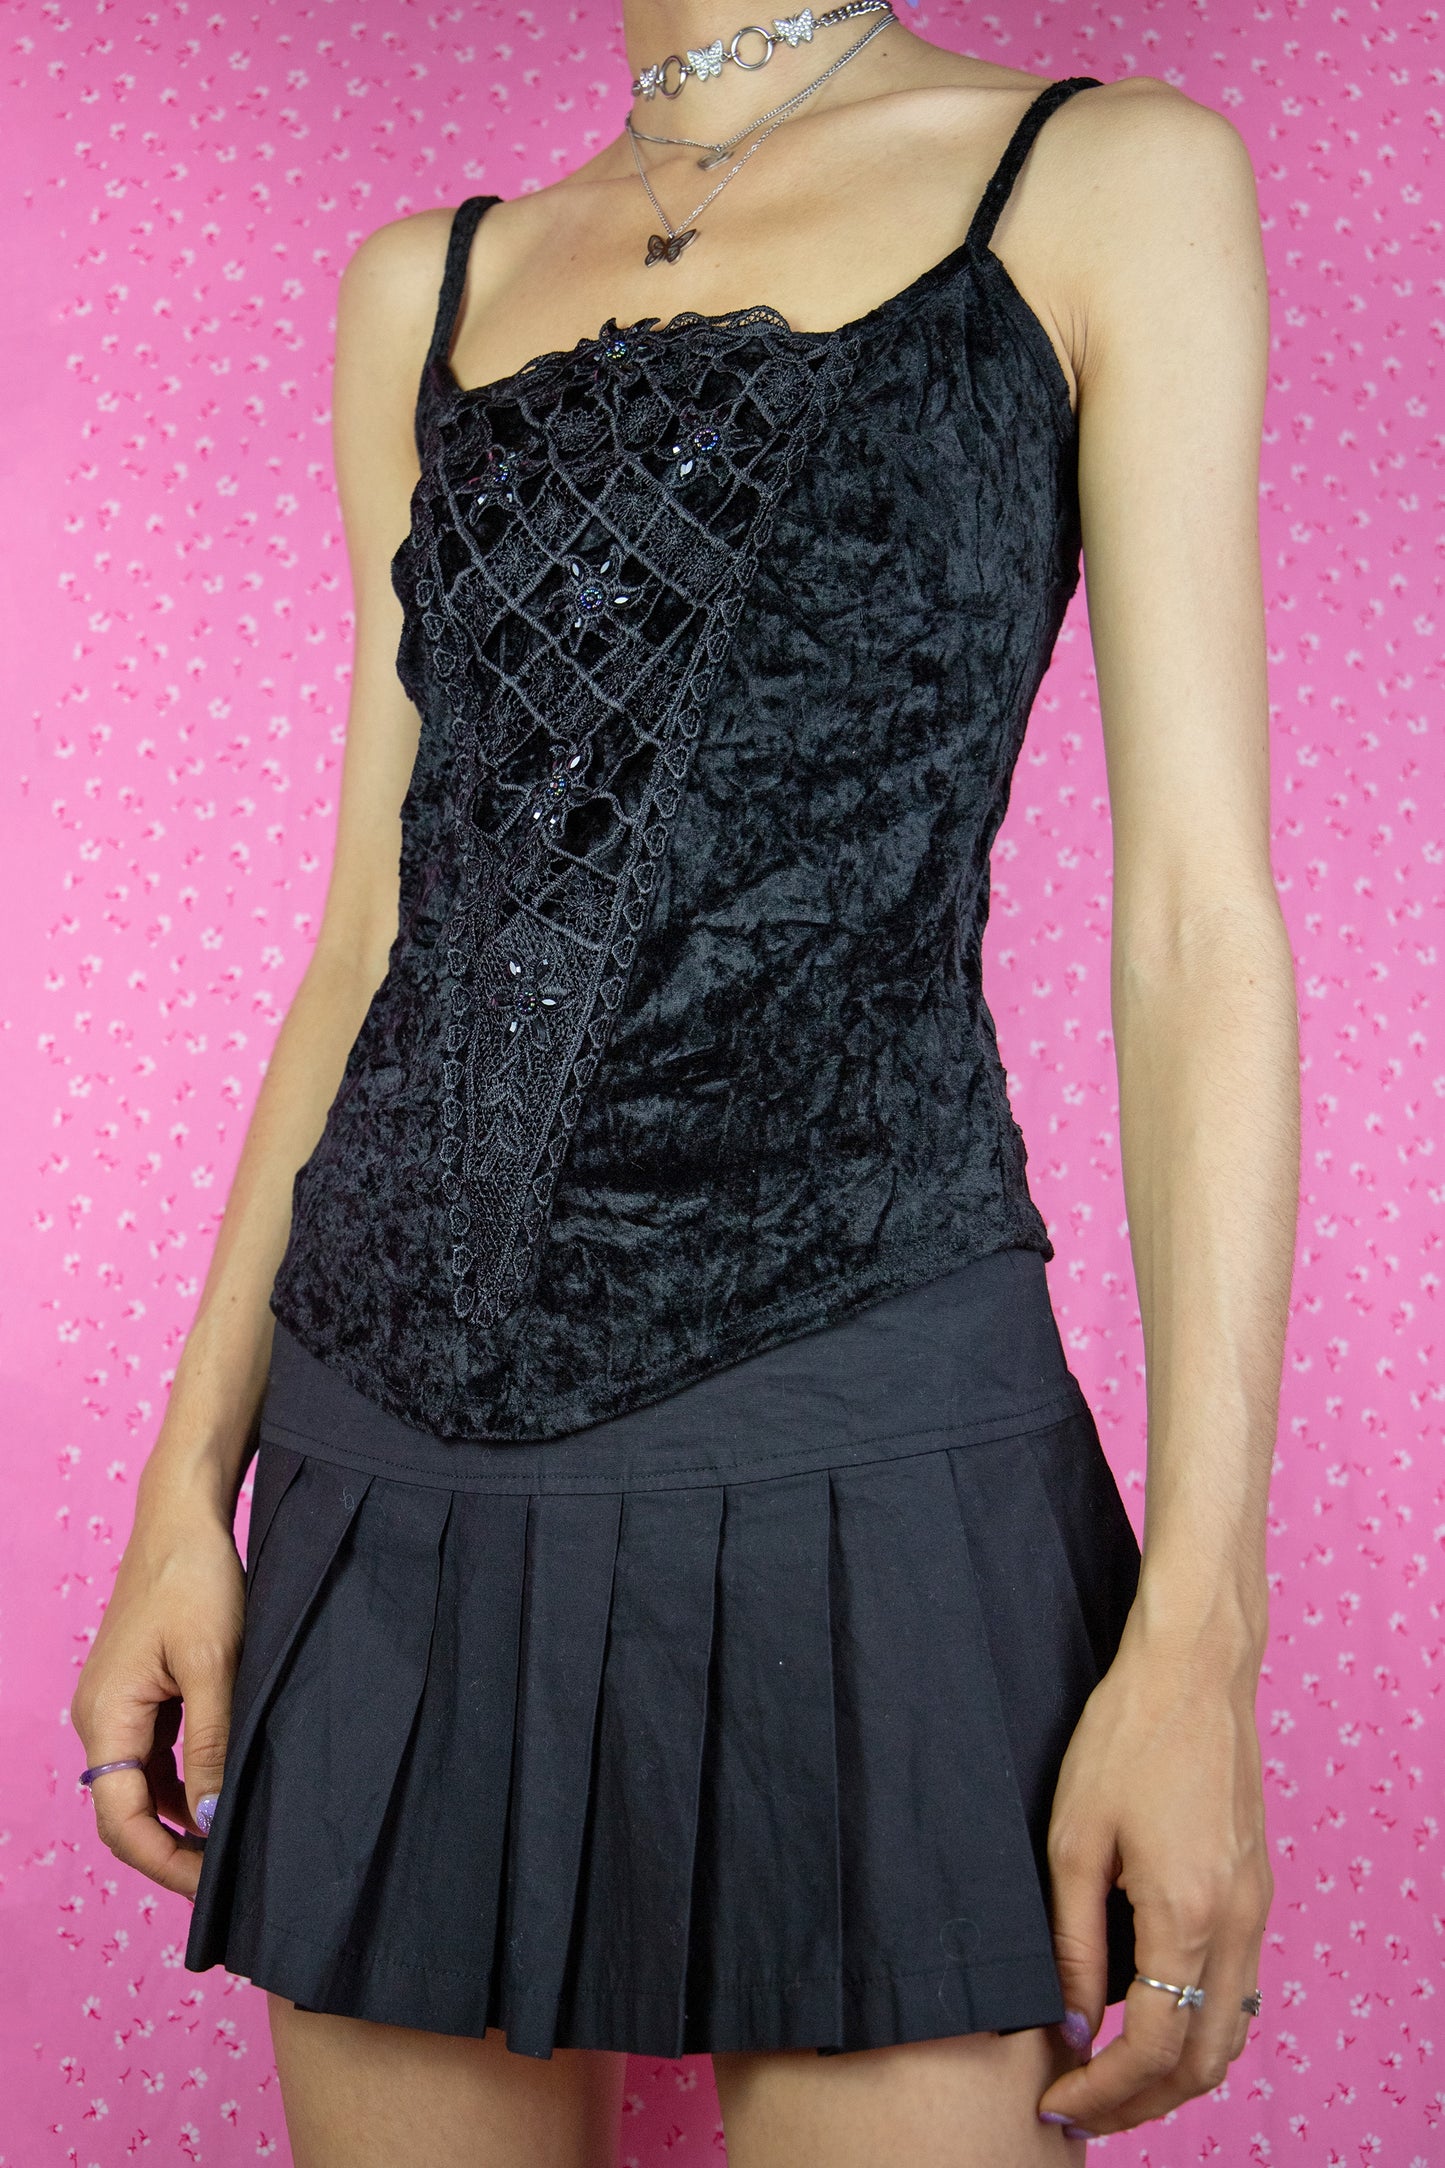 The Vintage Y2K Black Velvet Beaded Top is a crushed velvet black tank top with a stretchy fit, adorned with rhinestones and beads. This iconic top perfectly embodies the fairy grunge goth style of the 2000s.